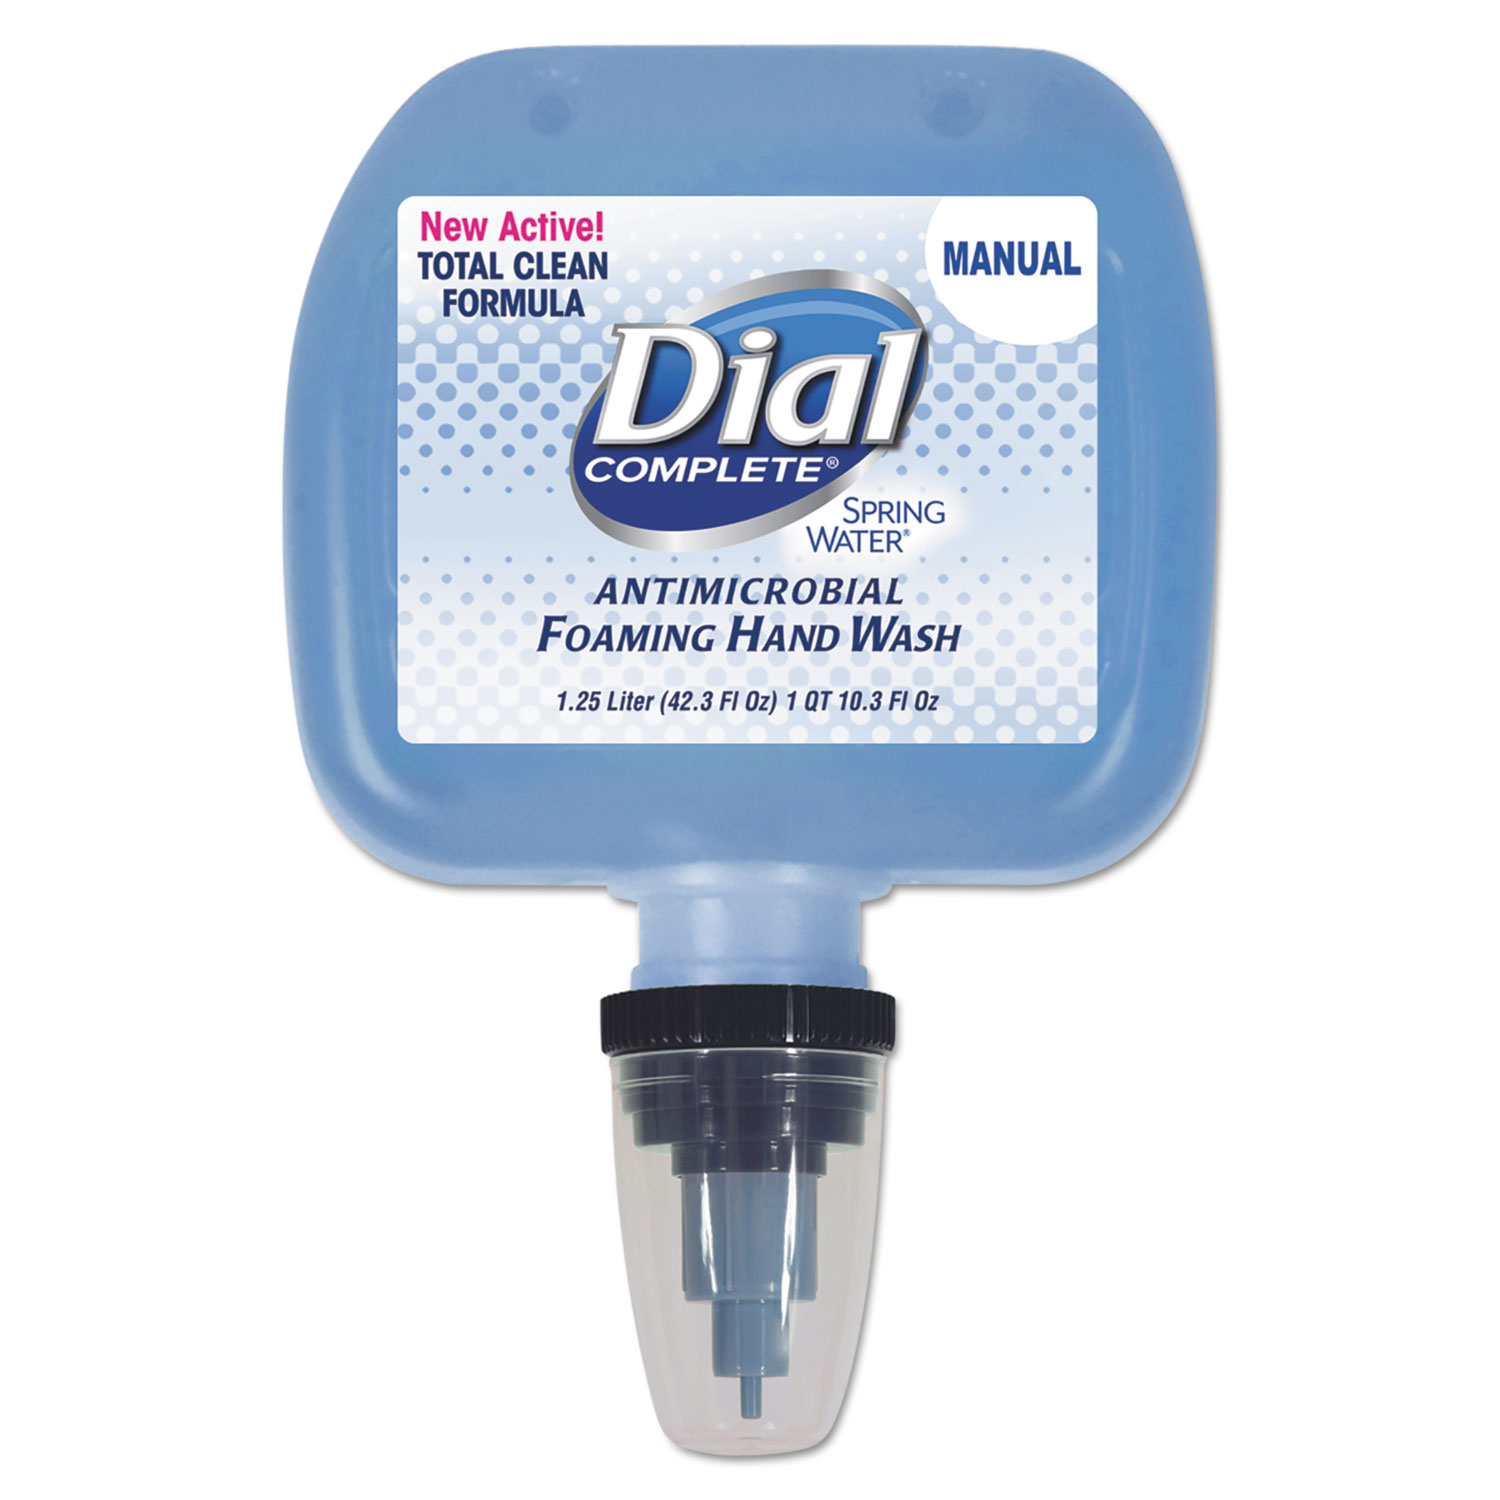  Dial Professional 17000134406 Antimicrobial Foaming Hand Wash, Spring Water Scent, 1.25 L Cartridge (DIA13440EA) 